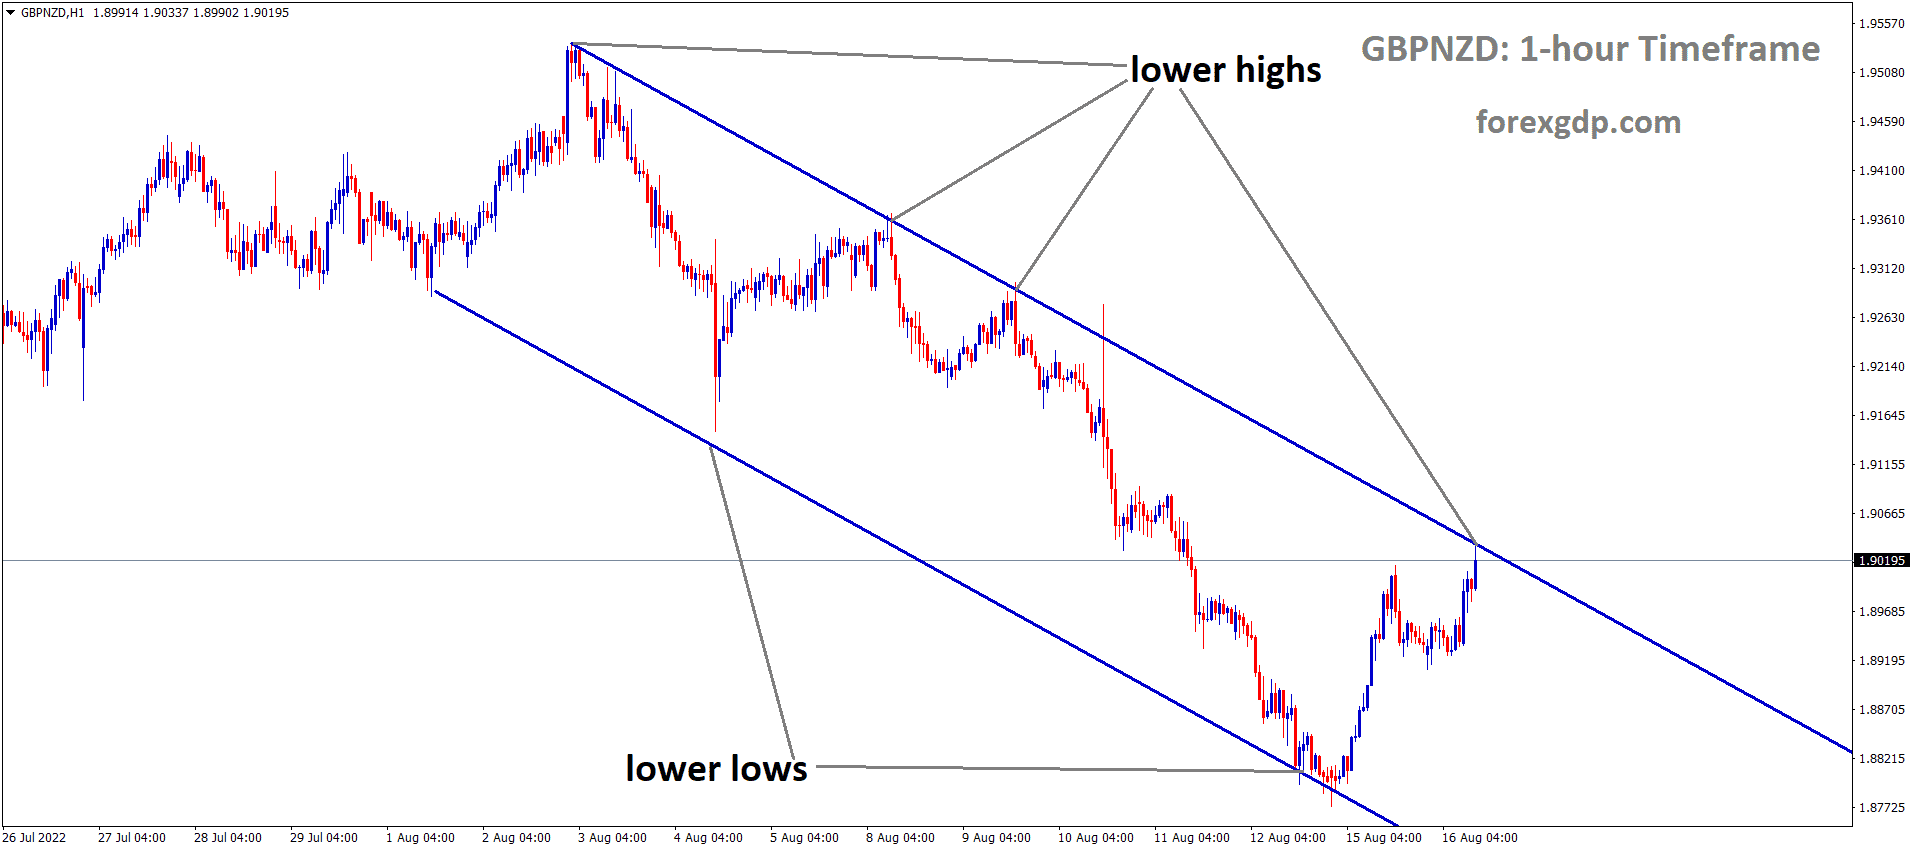 GBPNZD is moving in the Descending channel and the Market has reached the Lower high area of the channel